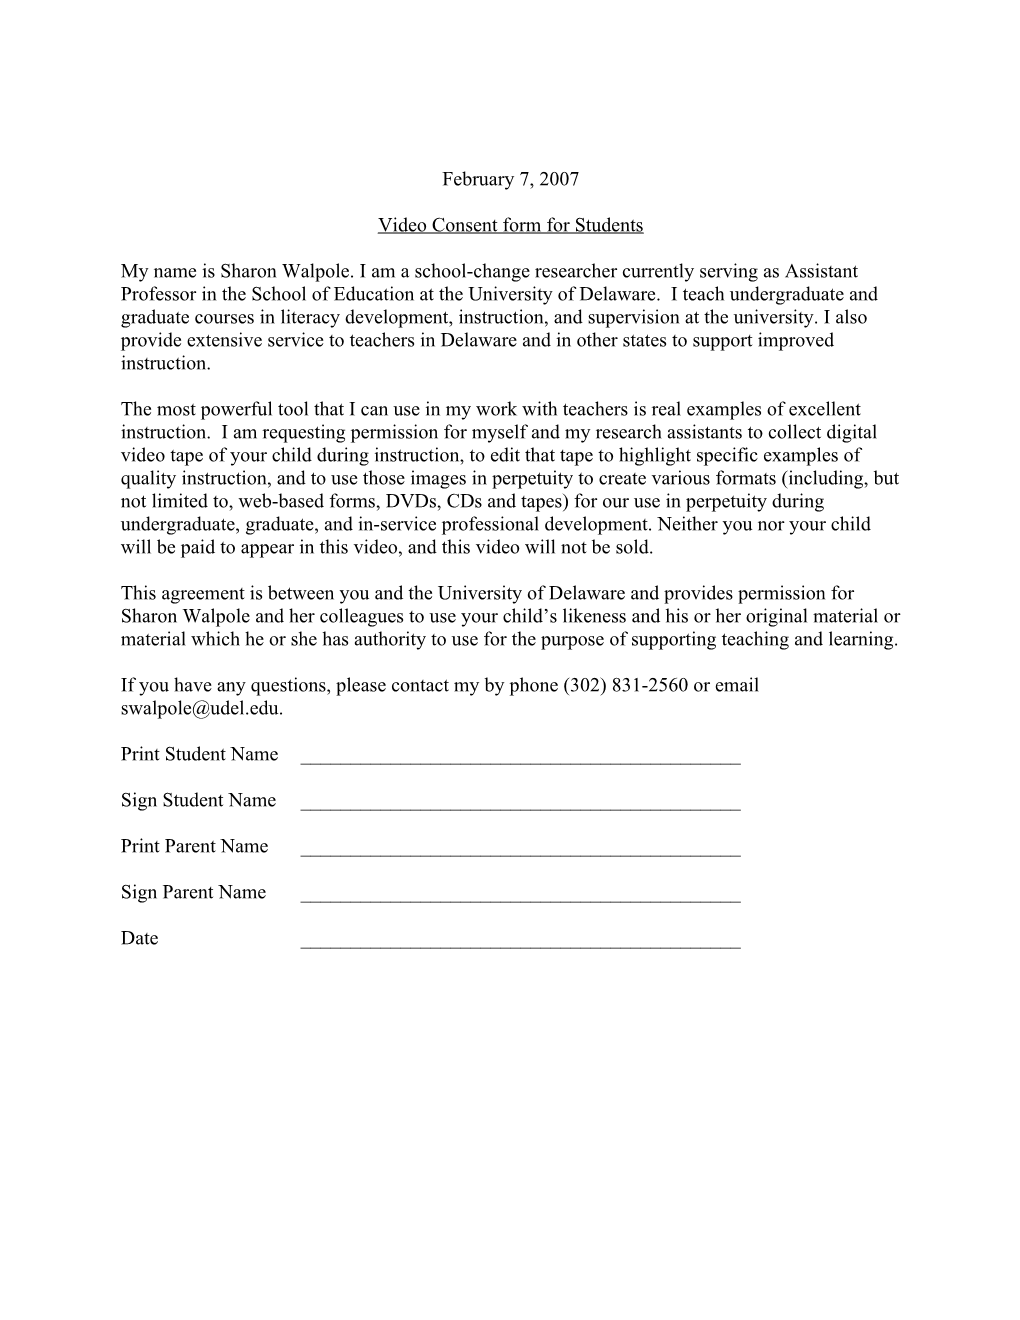 Video Consent Form for Students